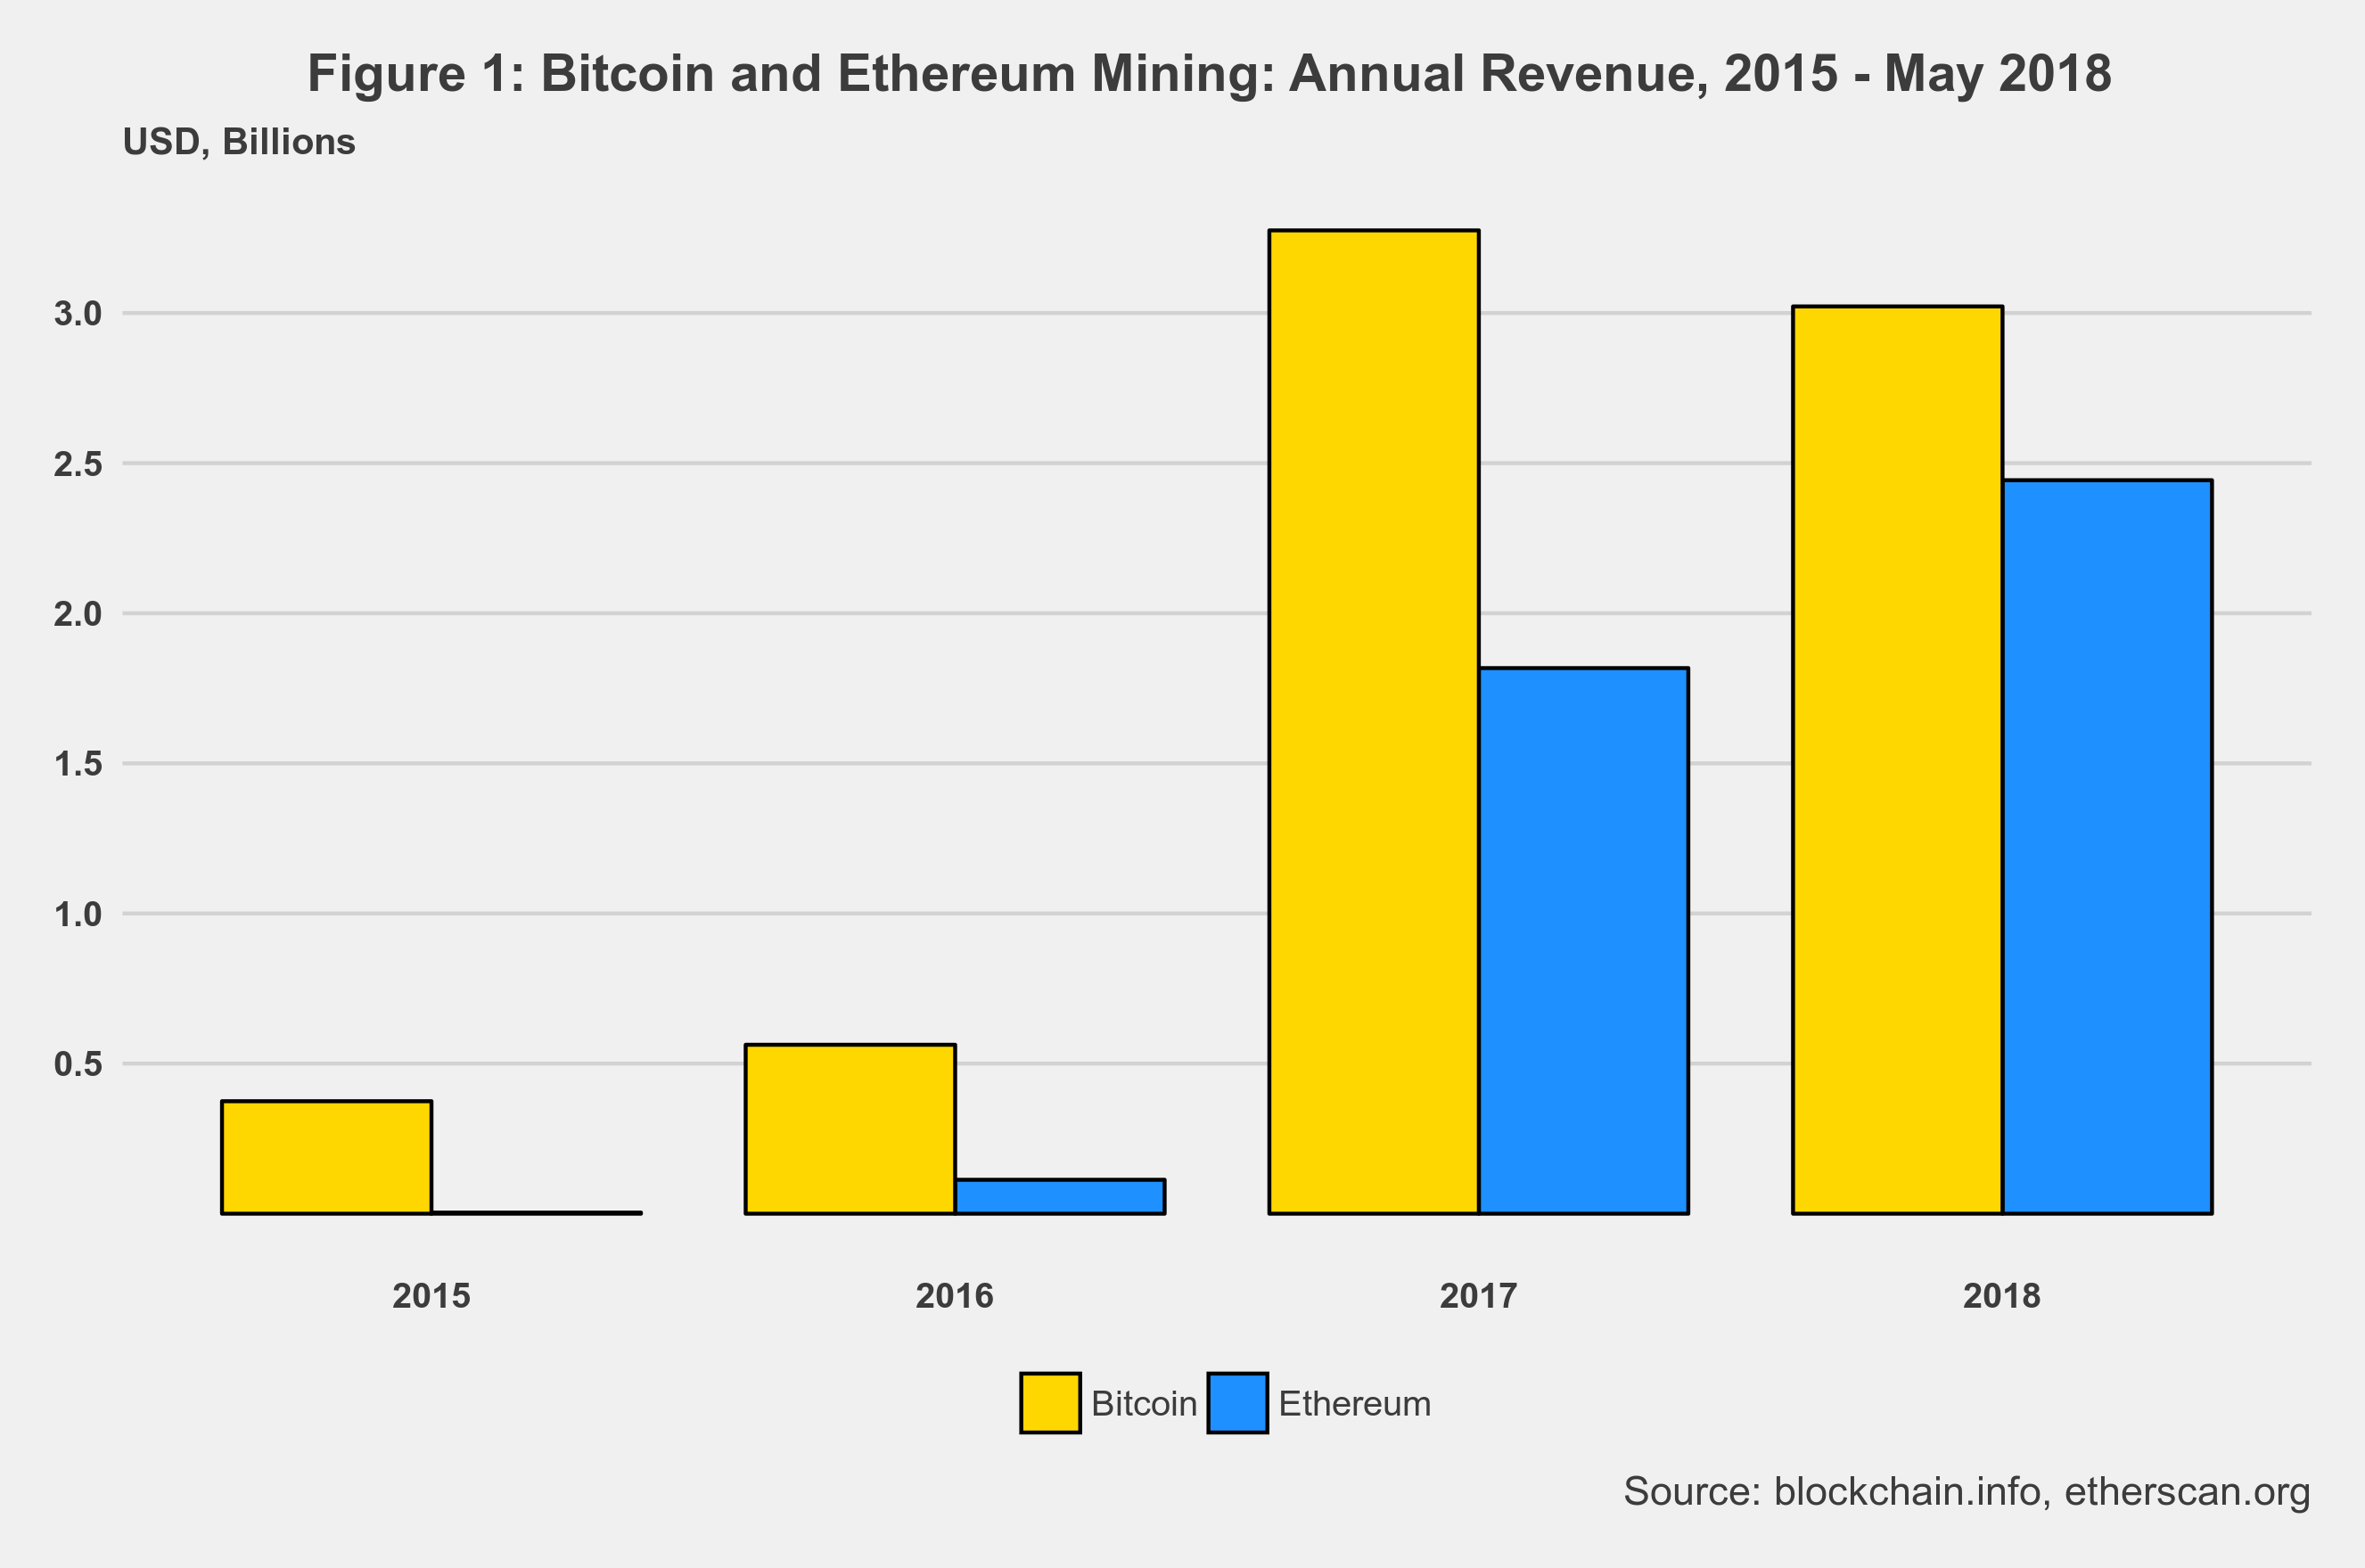 Blockchain Mining Costs and Revenues